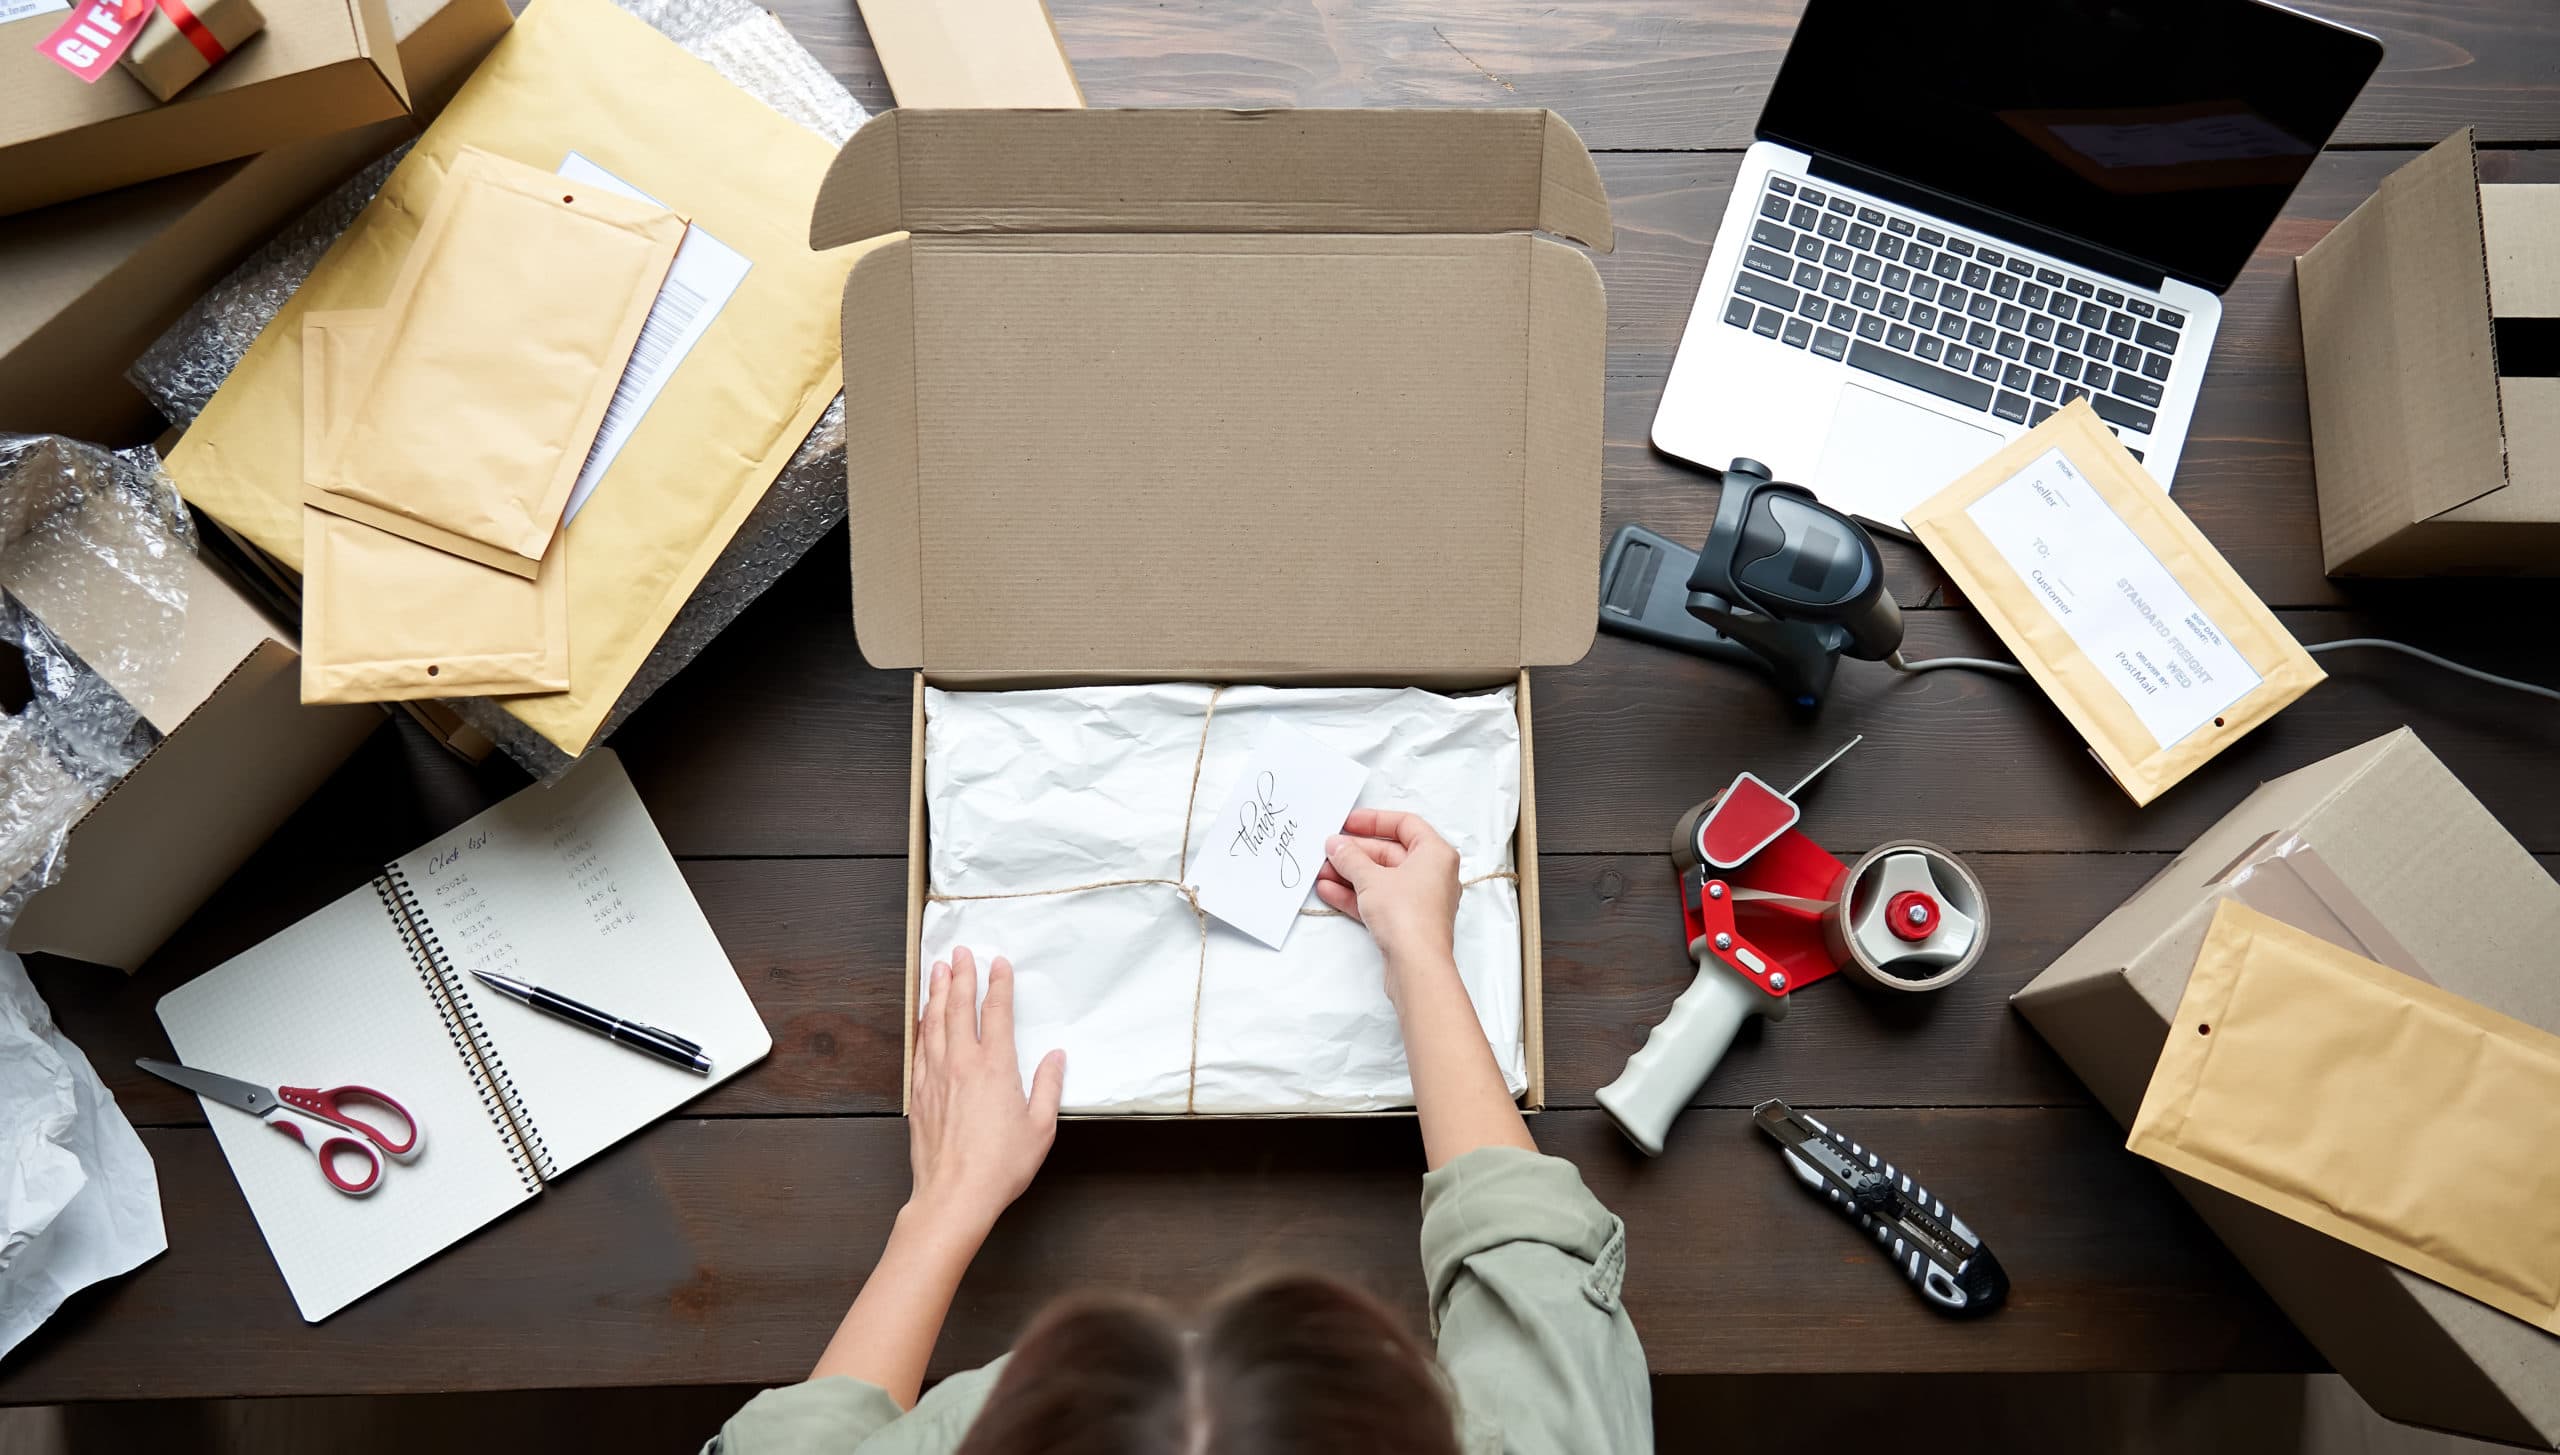 9 Smart Shipping Tricks And Packaging Tactics To Reduce Supply Chain Costs By A Significant Margin